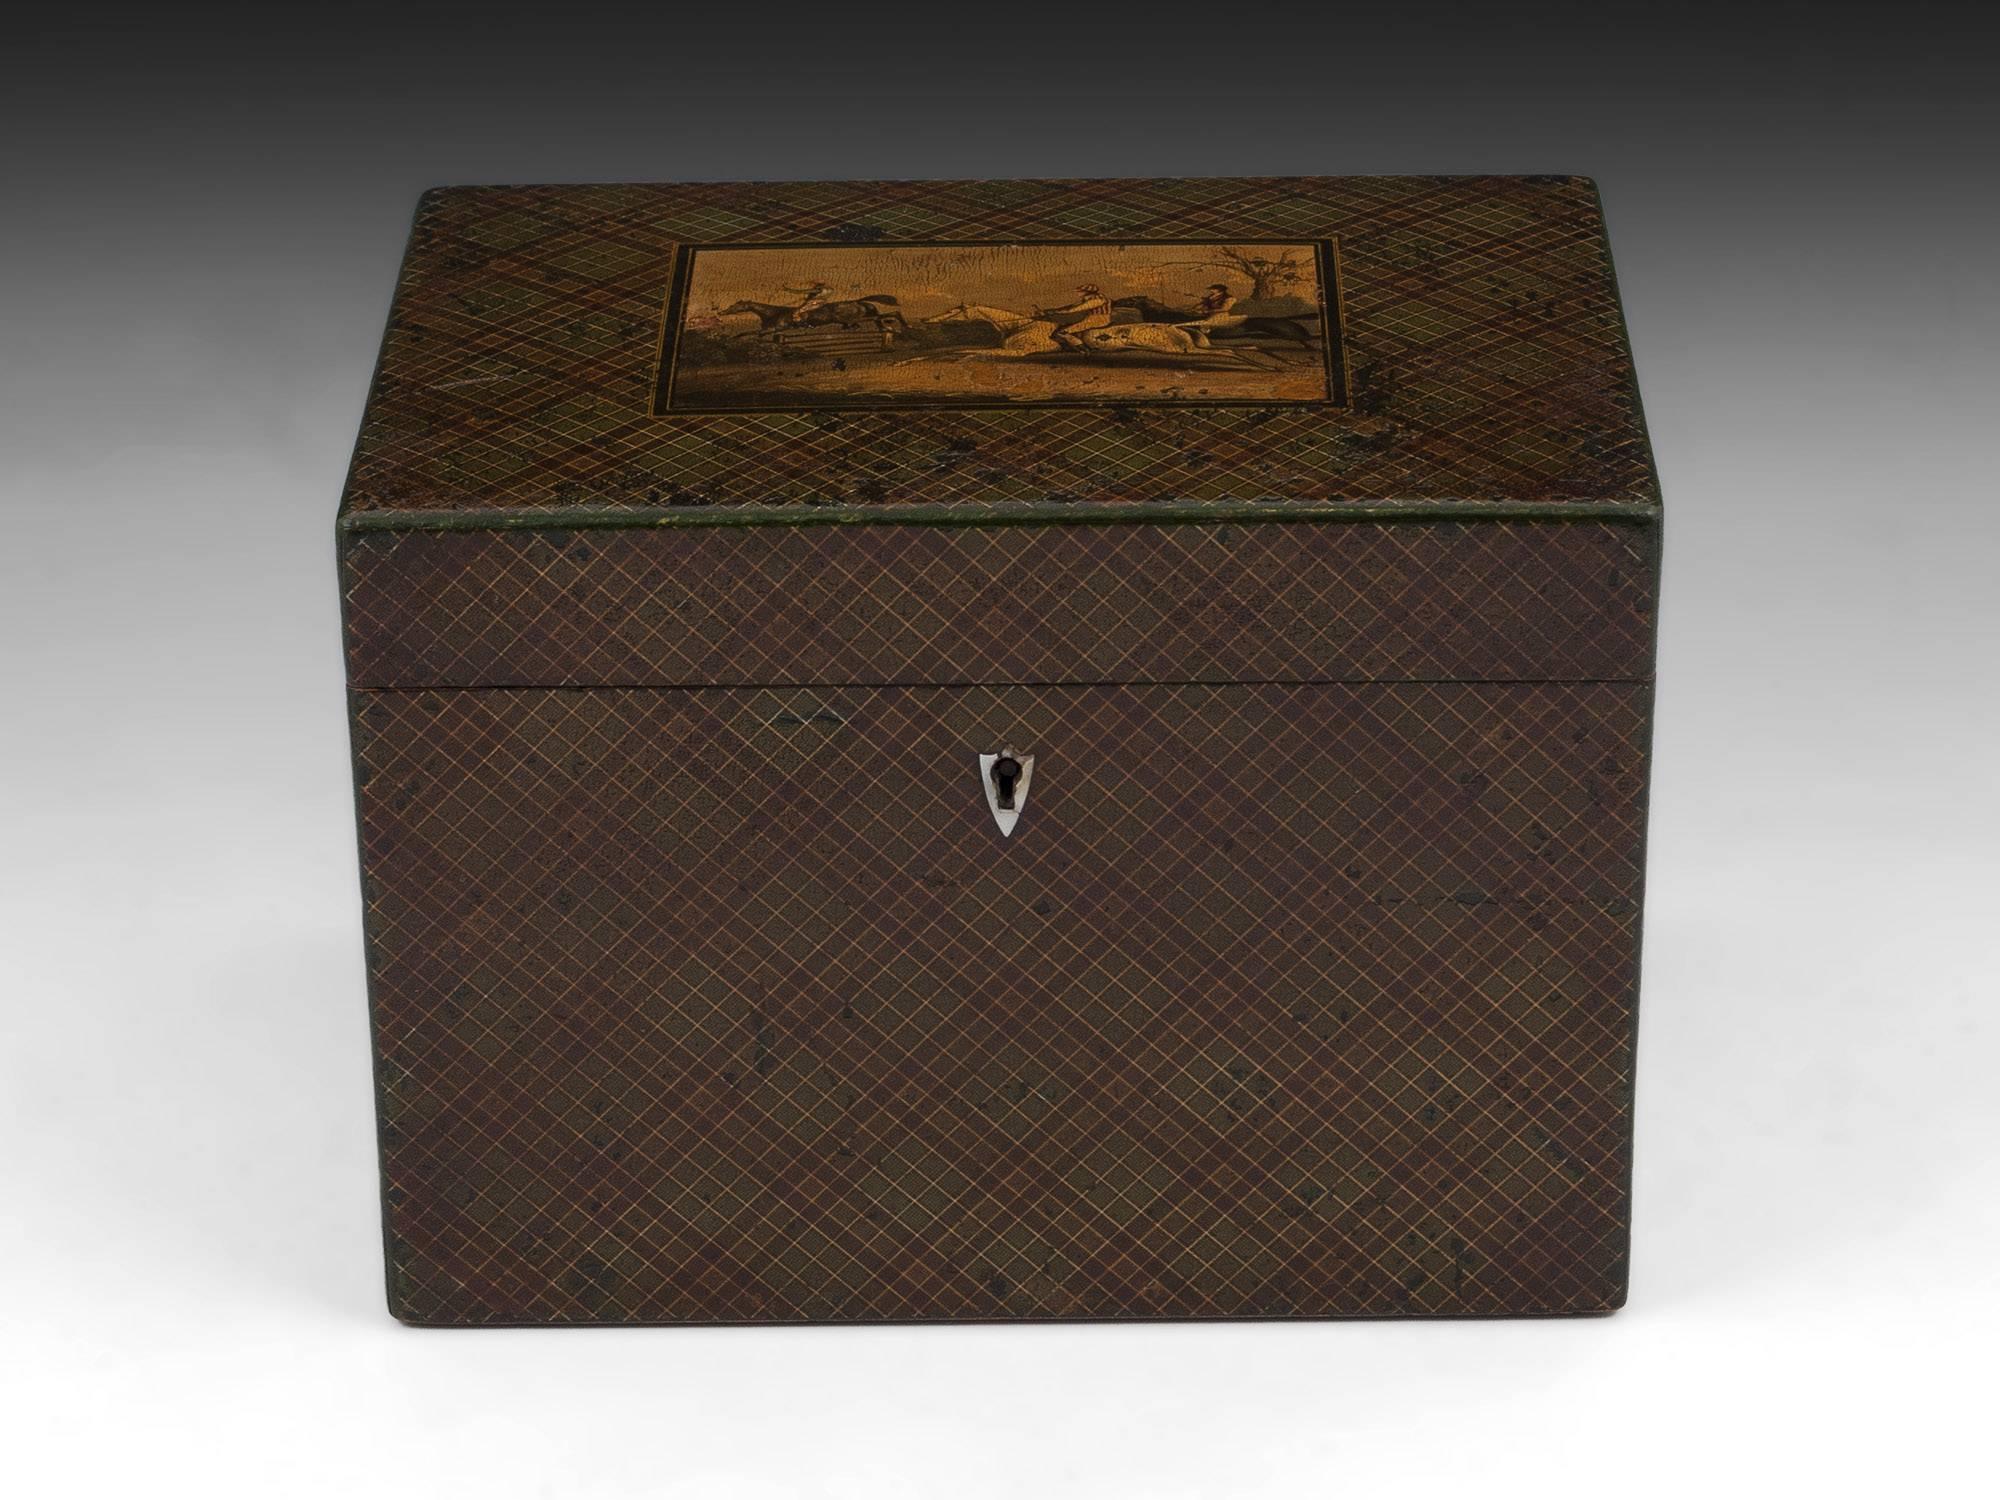 Antique Green Tartan Ware Tea Caddy with a detailed painted scene of a cross country horse race / Steeple Chase to the top. The interior of the Tartan Ware tea caddy contains traces of the original foil lining the lid. The heart shaped escutcheon to